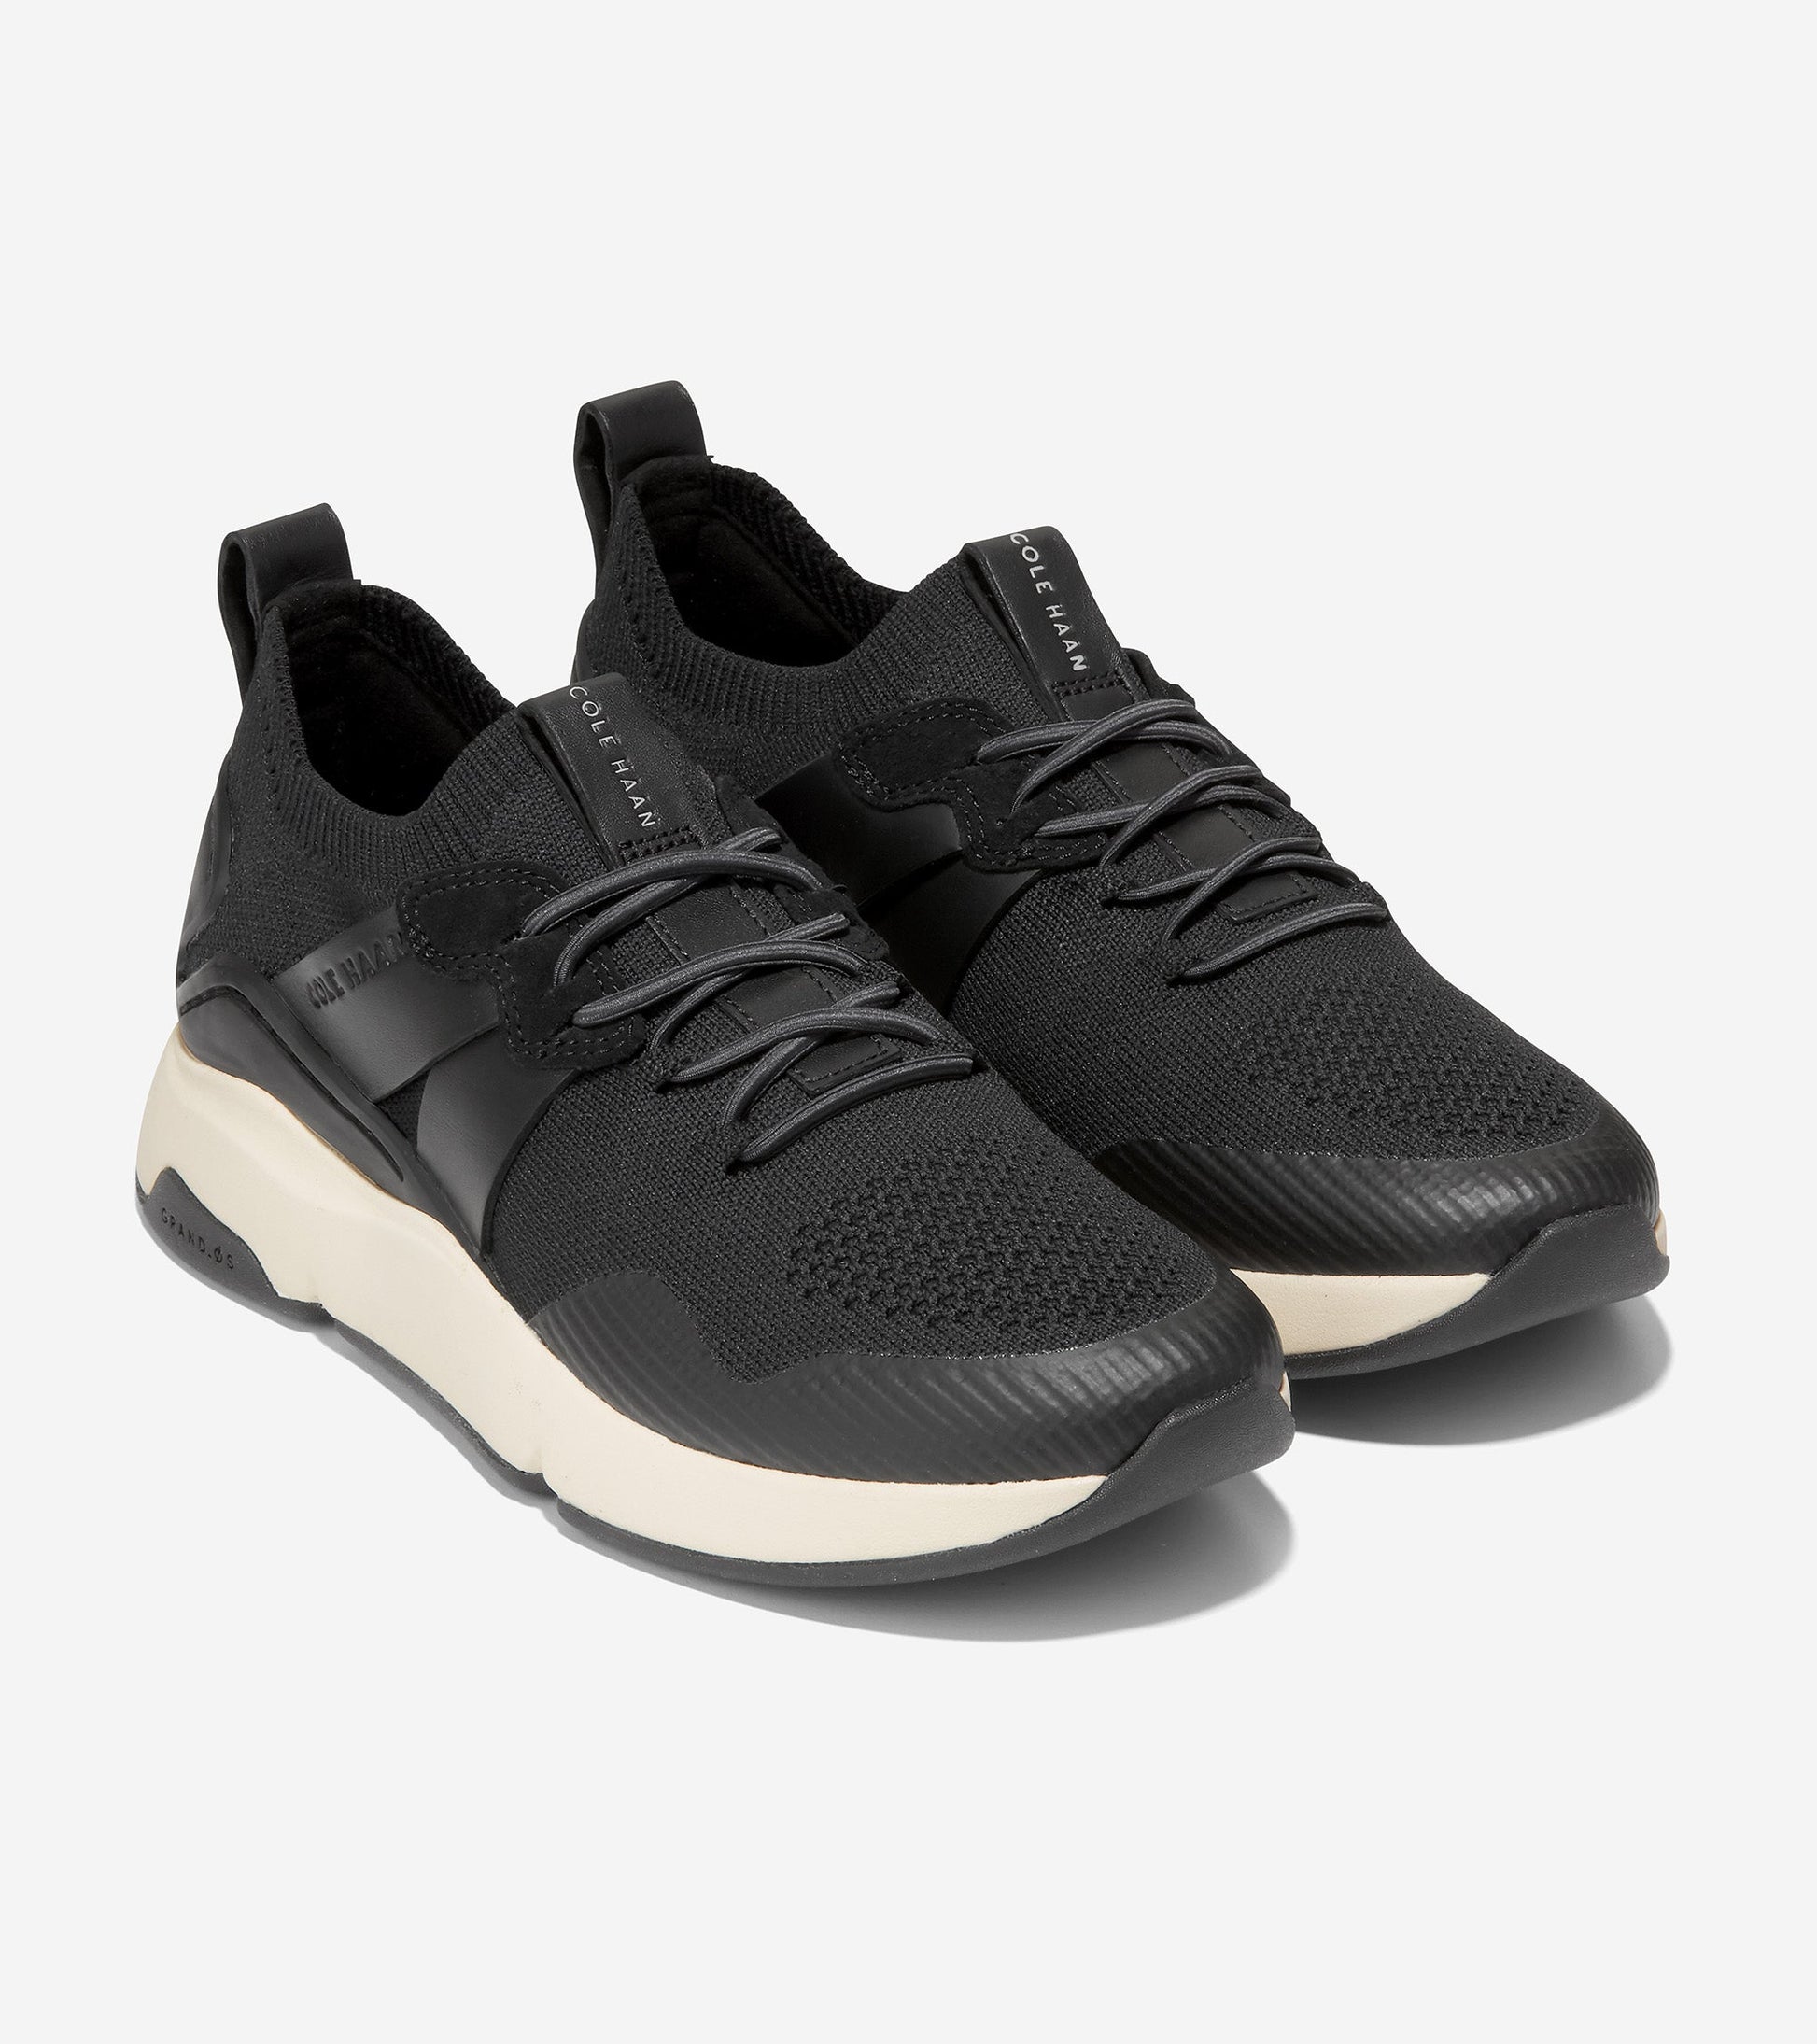 ZERØGRAND All-Day Trainer Black Knit-Ivory - CH